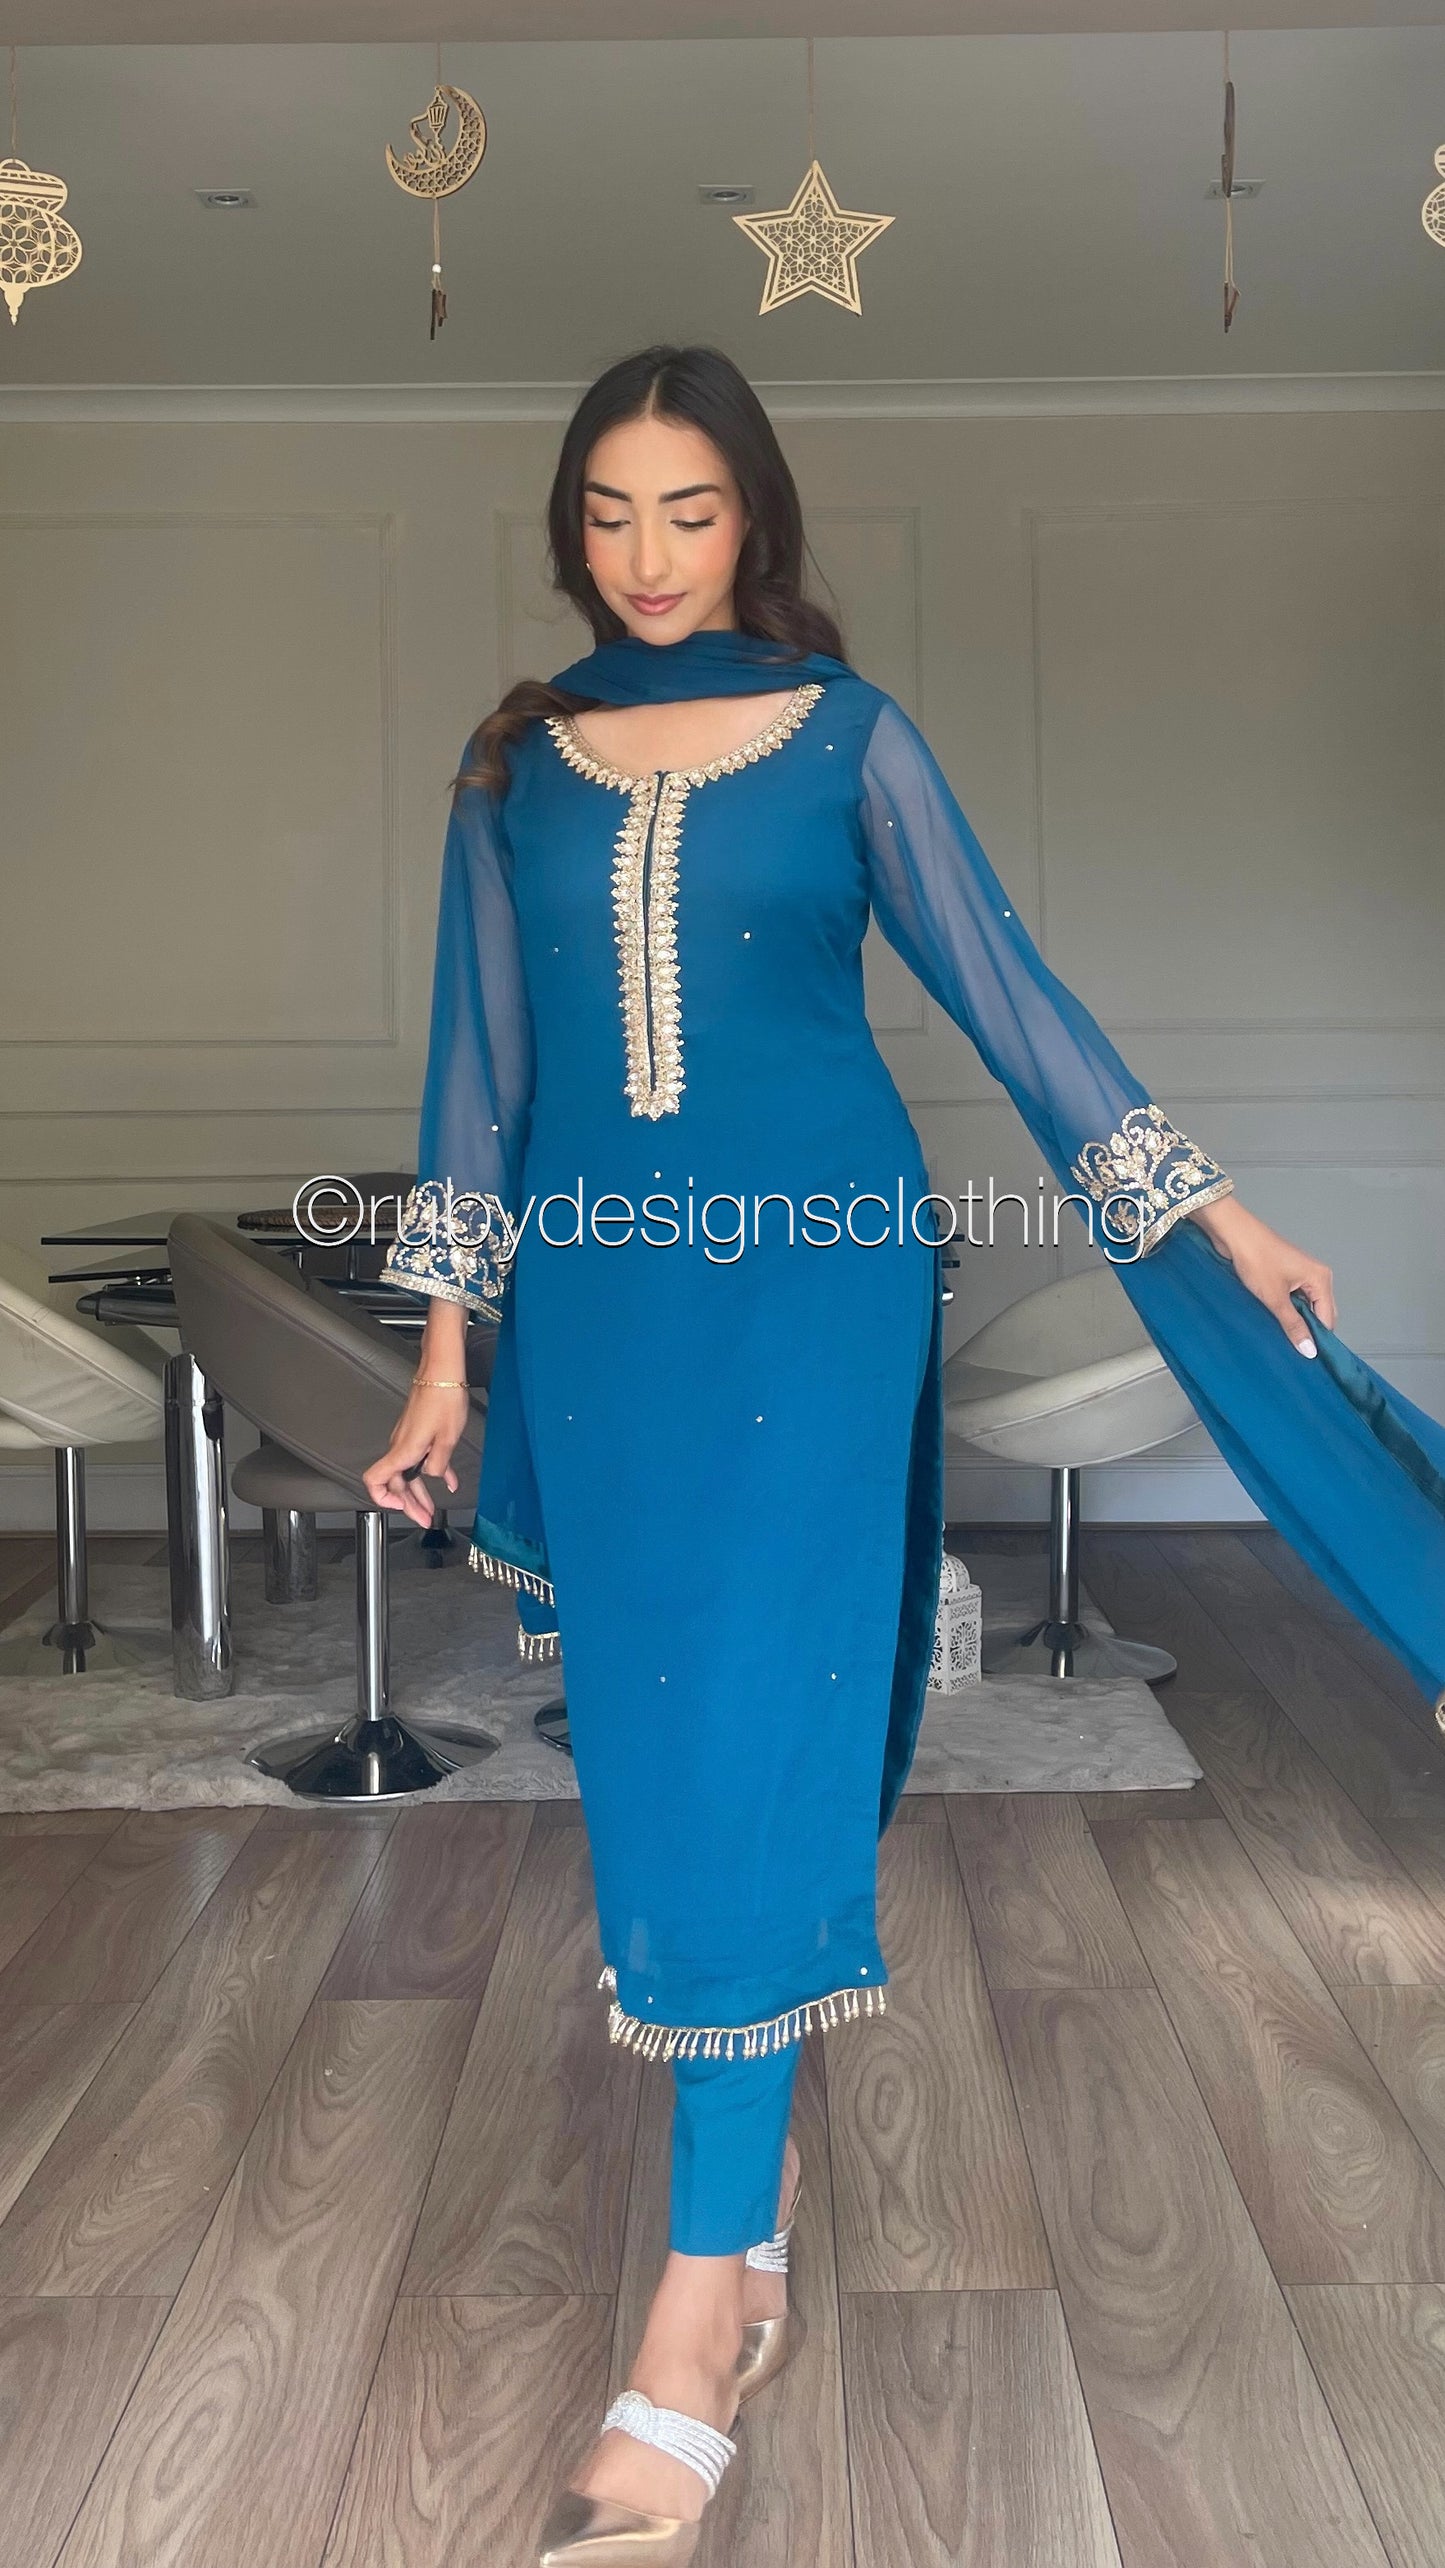 SOFIA Teal - 3 Piece Teal Chiffon Suit with Gold Handwork